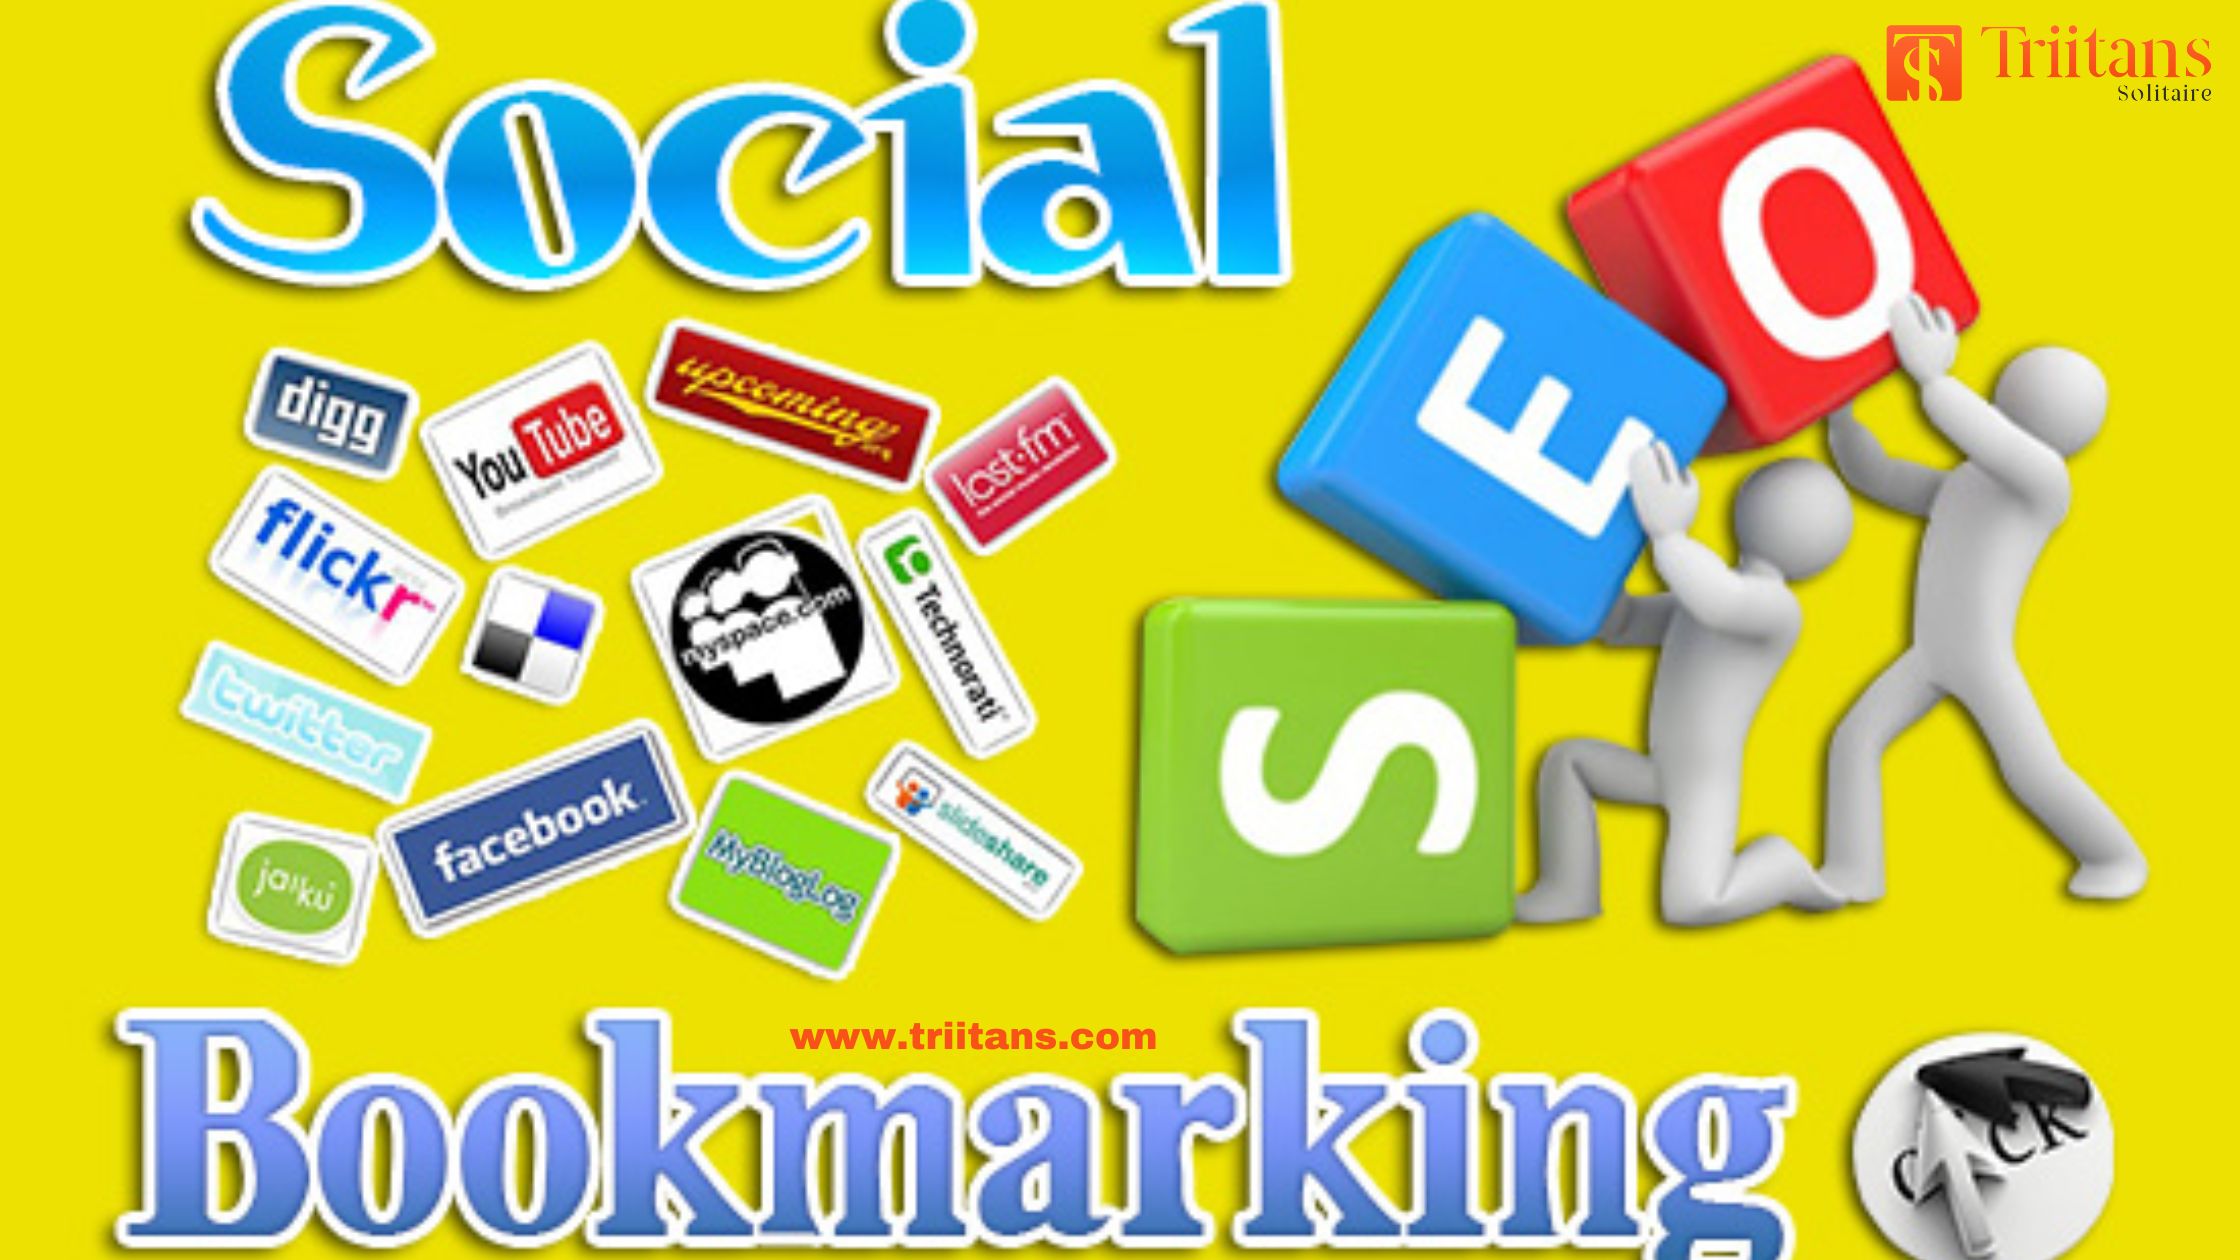 Free Social Bookmarking Sites List 2020 for Quality Backlinks